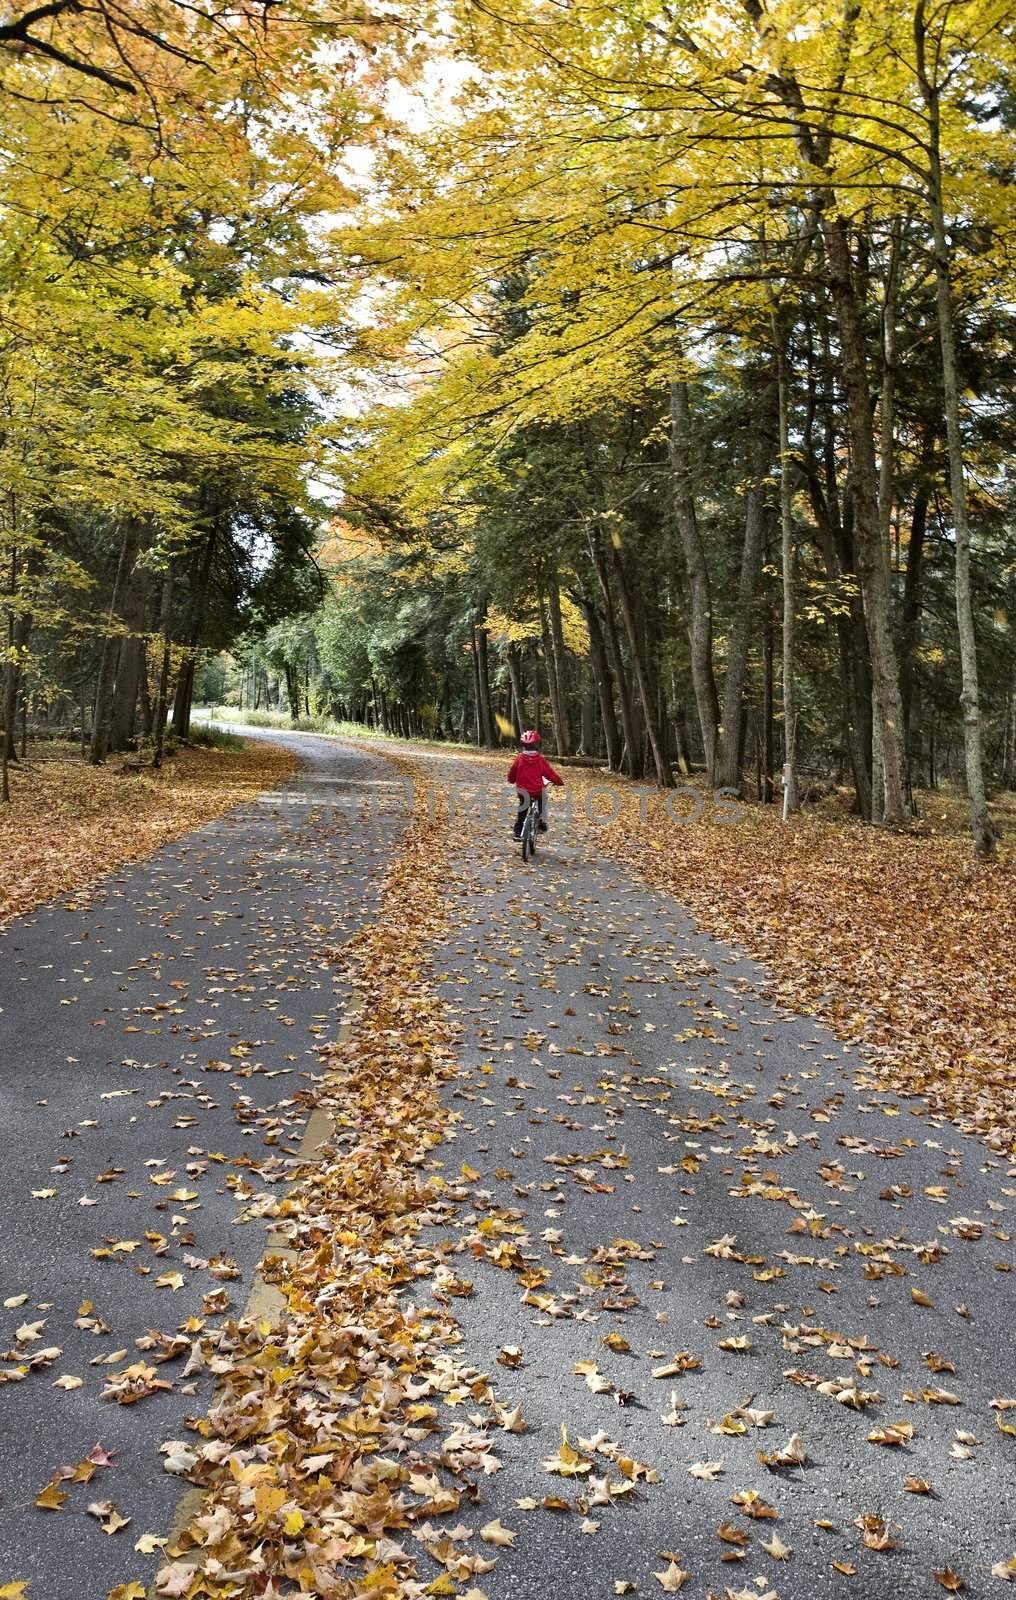 Autumn Leaves on road northern Michigan child on bicycle bike